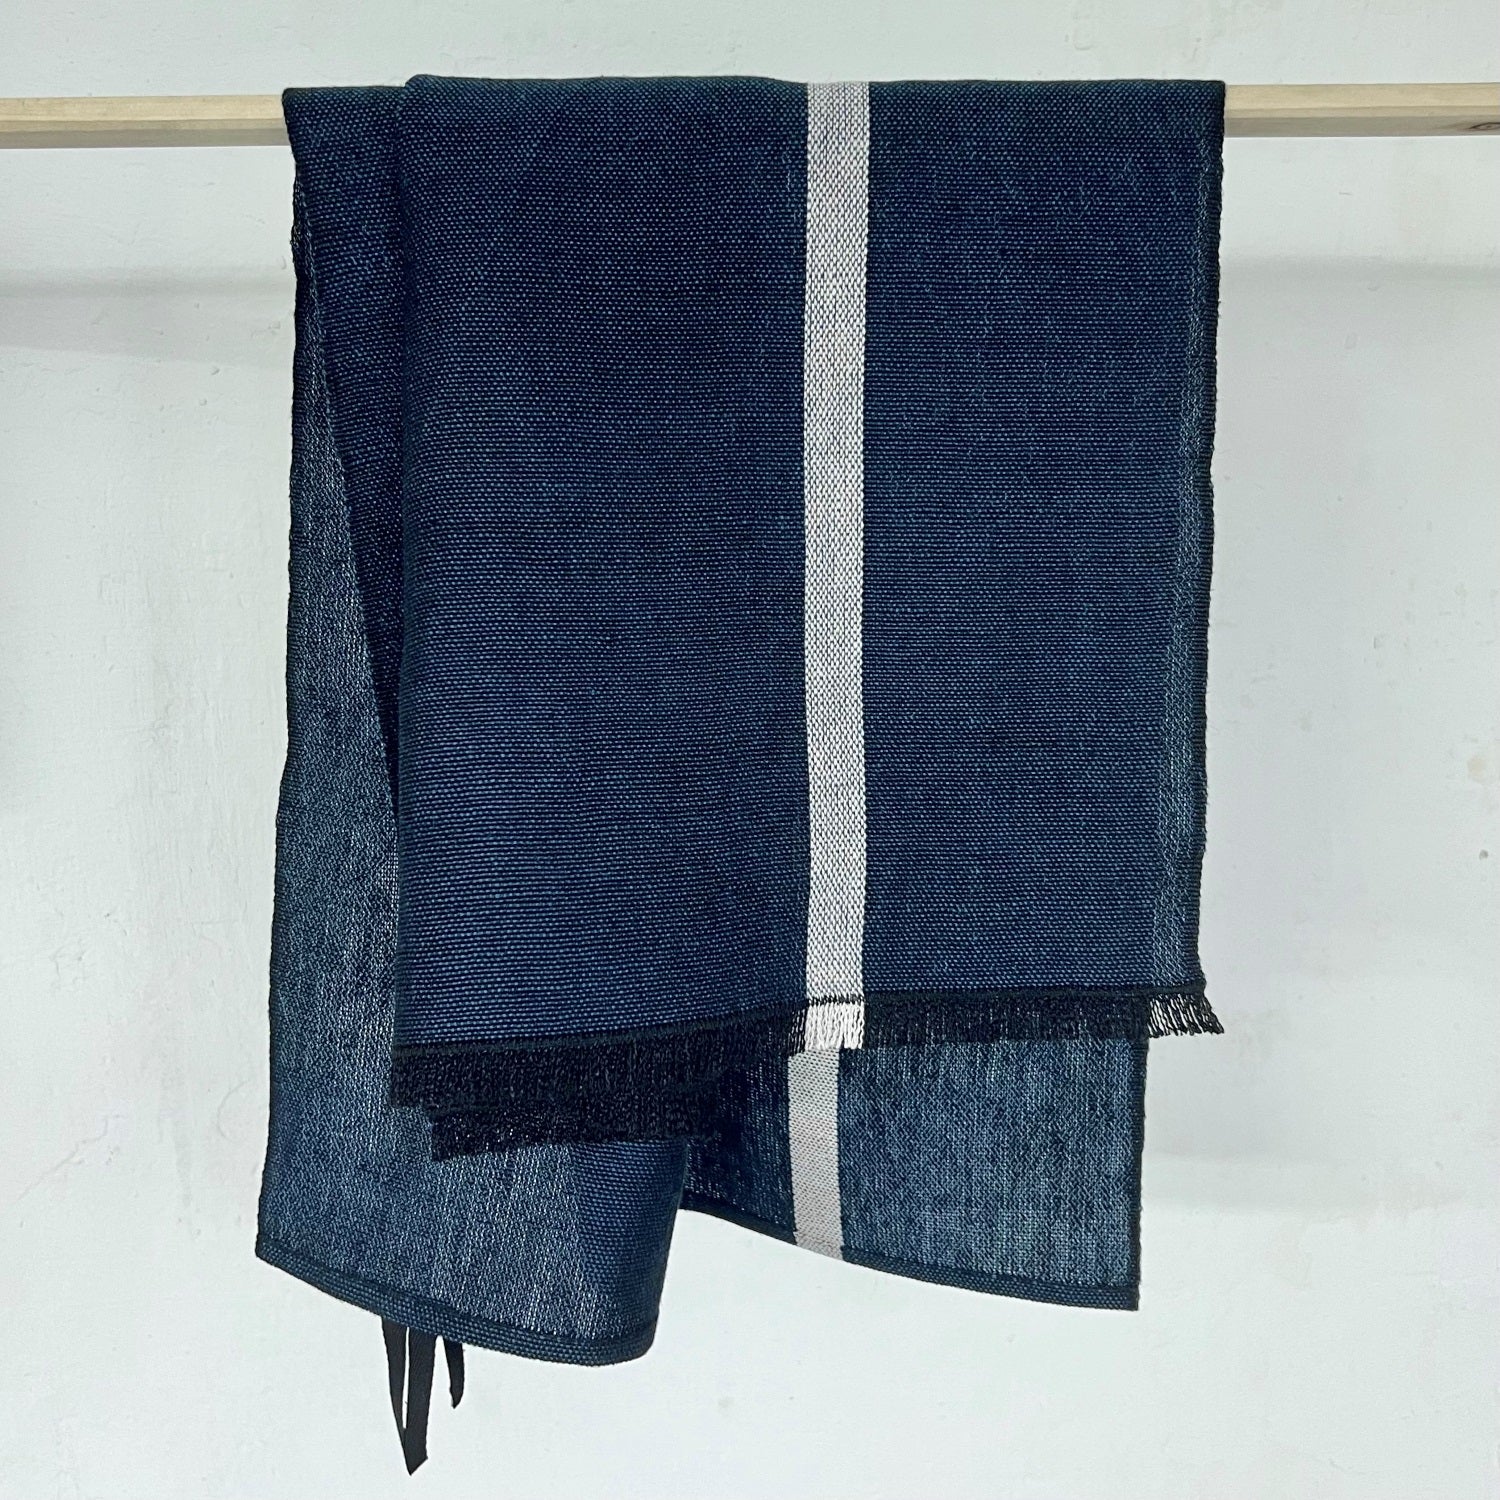 Handwoven linen kitchen towel in ocean blue 50x75 cm with small fringes on one side and decorative white line